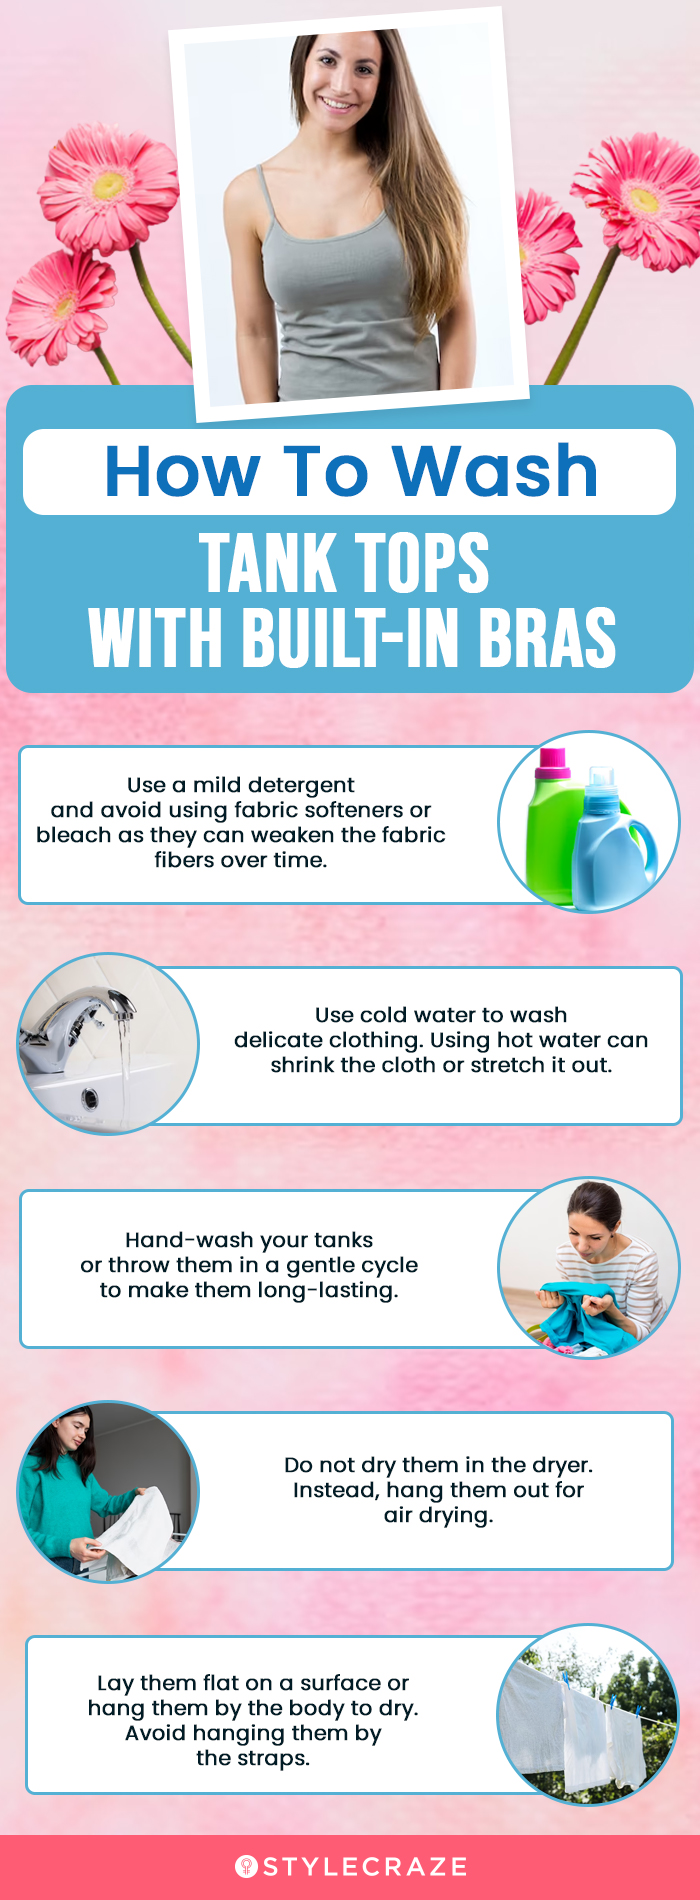 How to Care for Tank Tops with Built-in Bras (infographic)